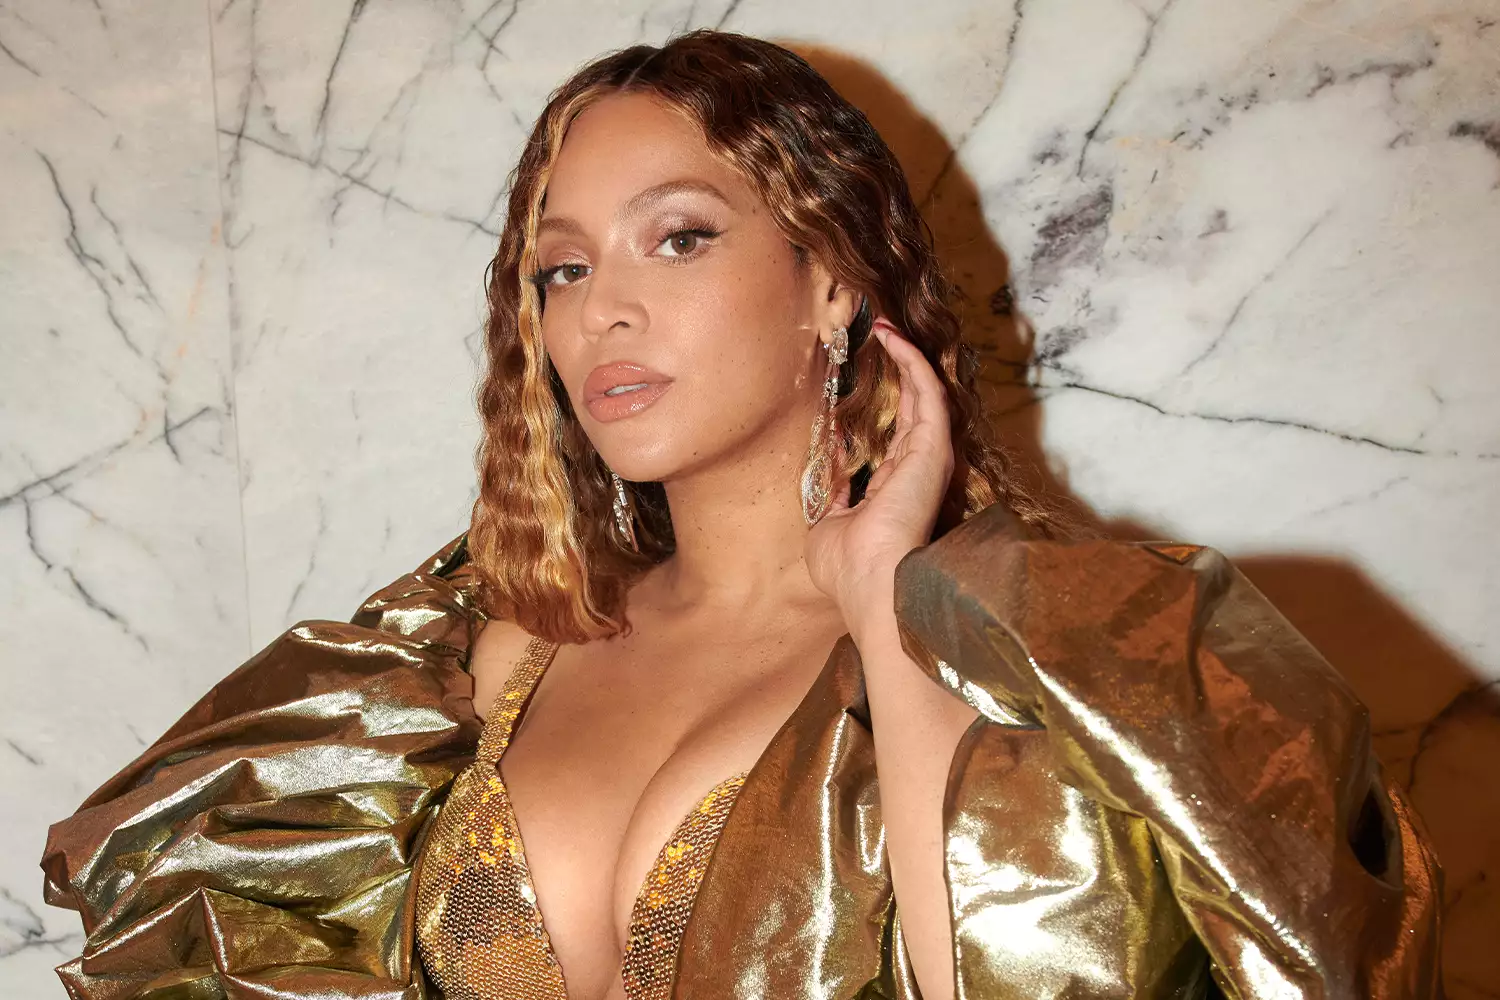 Beyoncé's Champagne Chrome Nails Are a Sophisticated Twist on the Metallic Trend